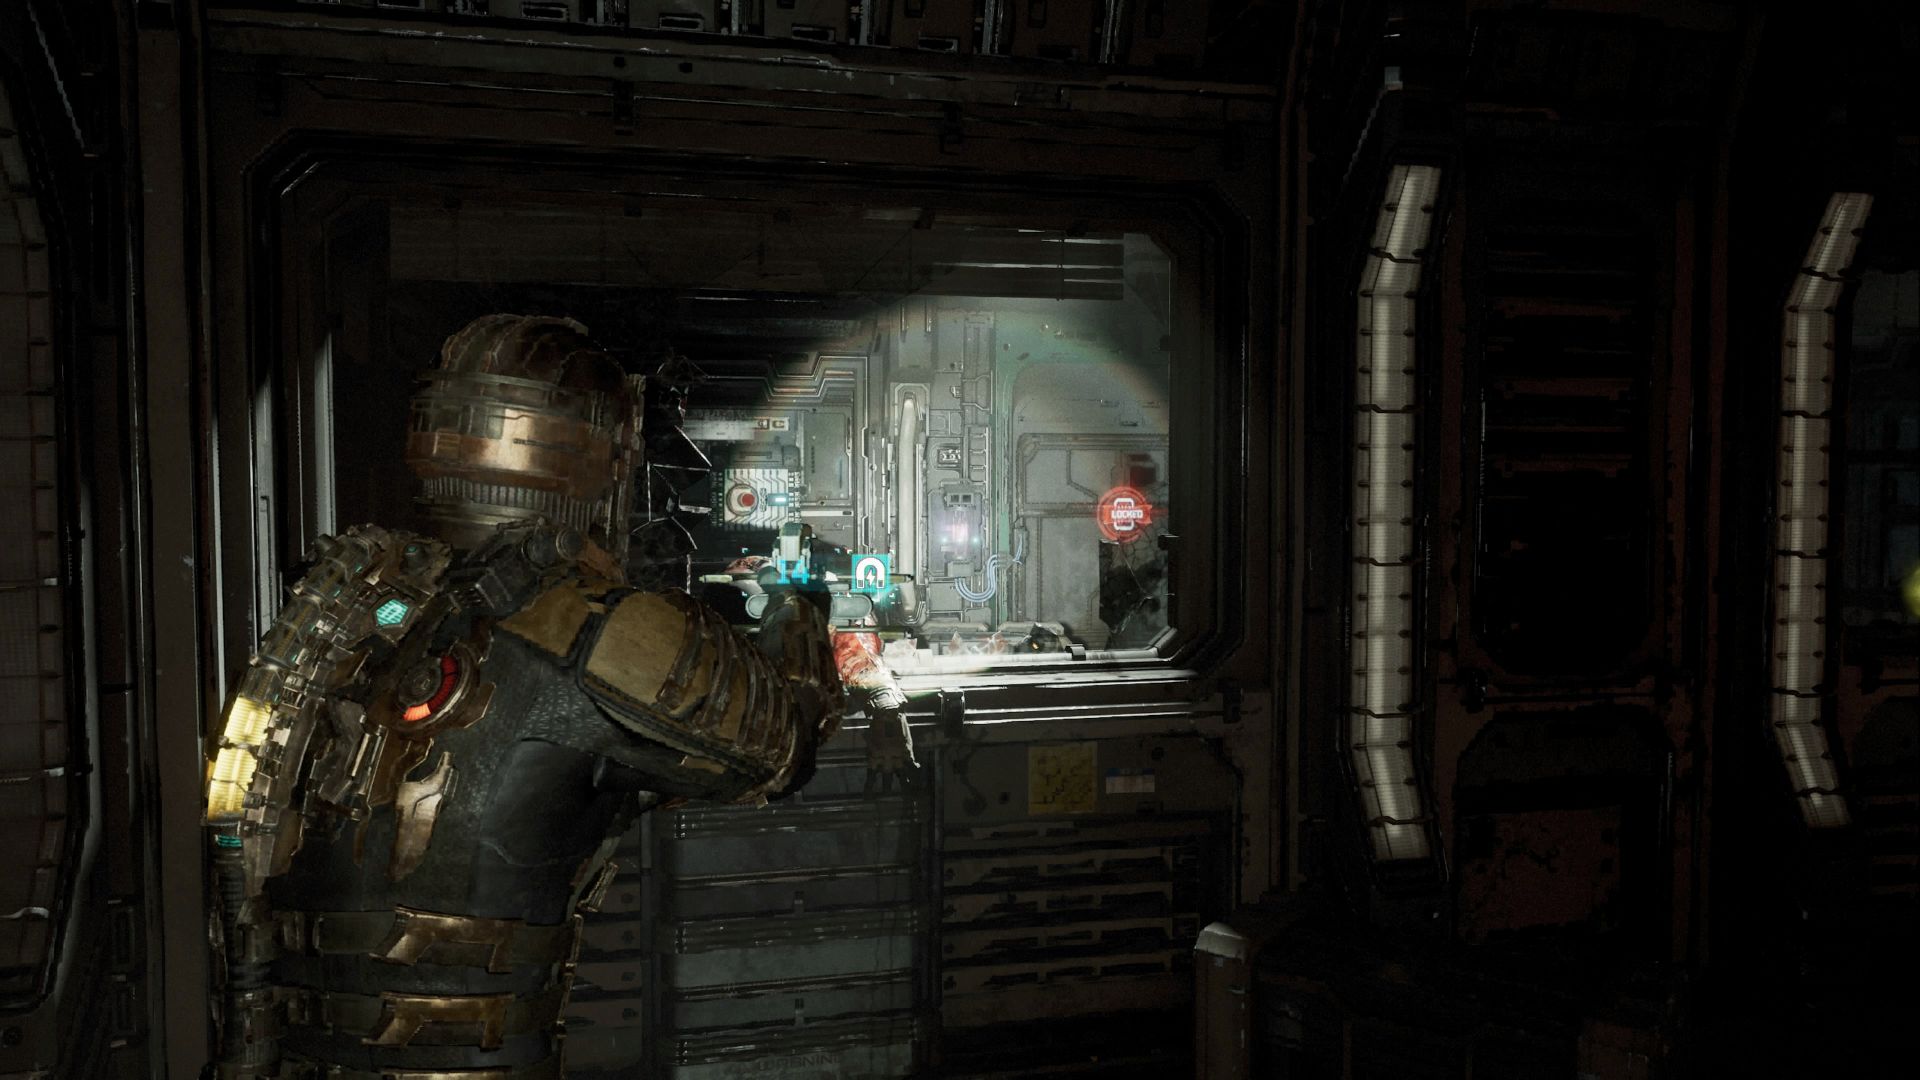 The solution to get the Pulse Rifle Upgrade in Chapter 4 of Dead Space